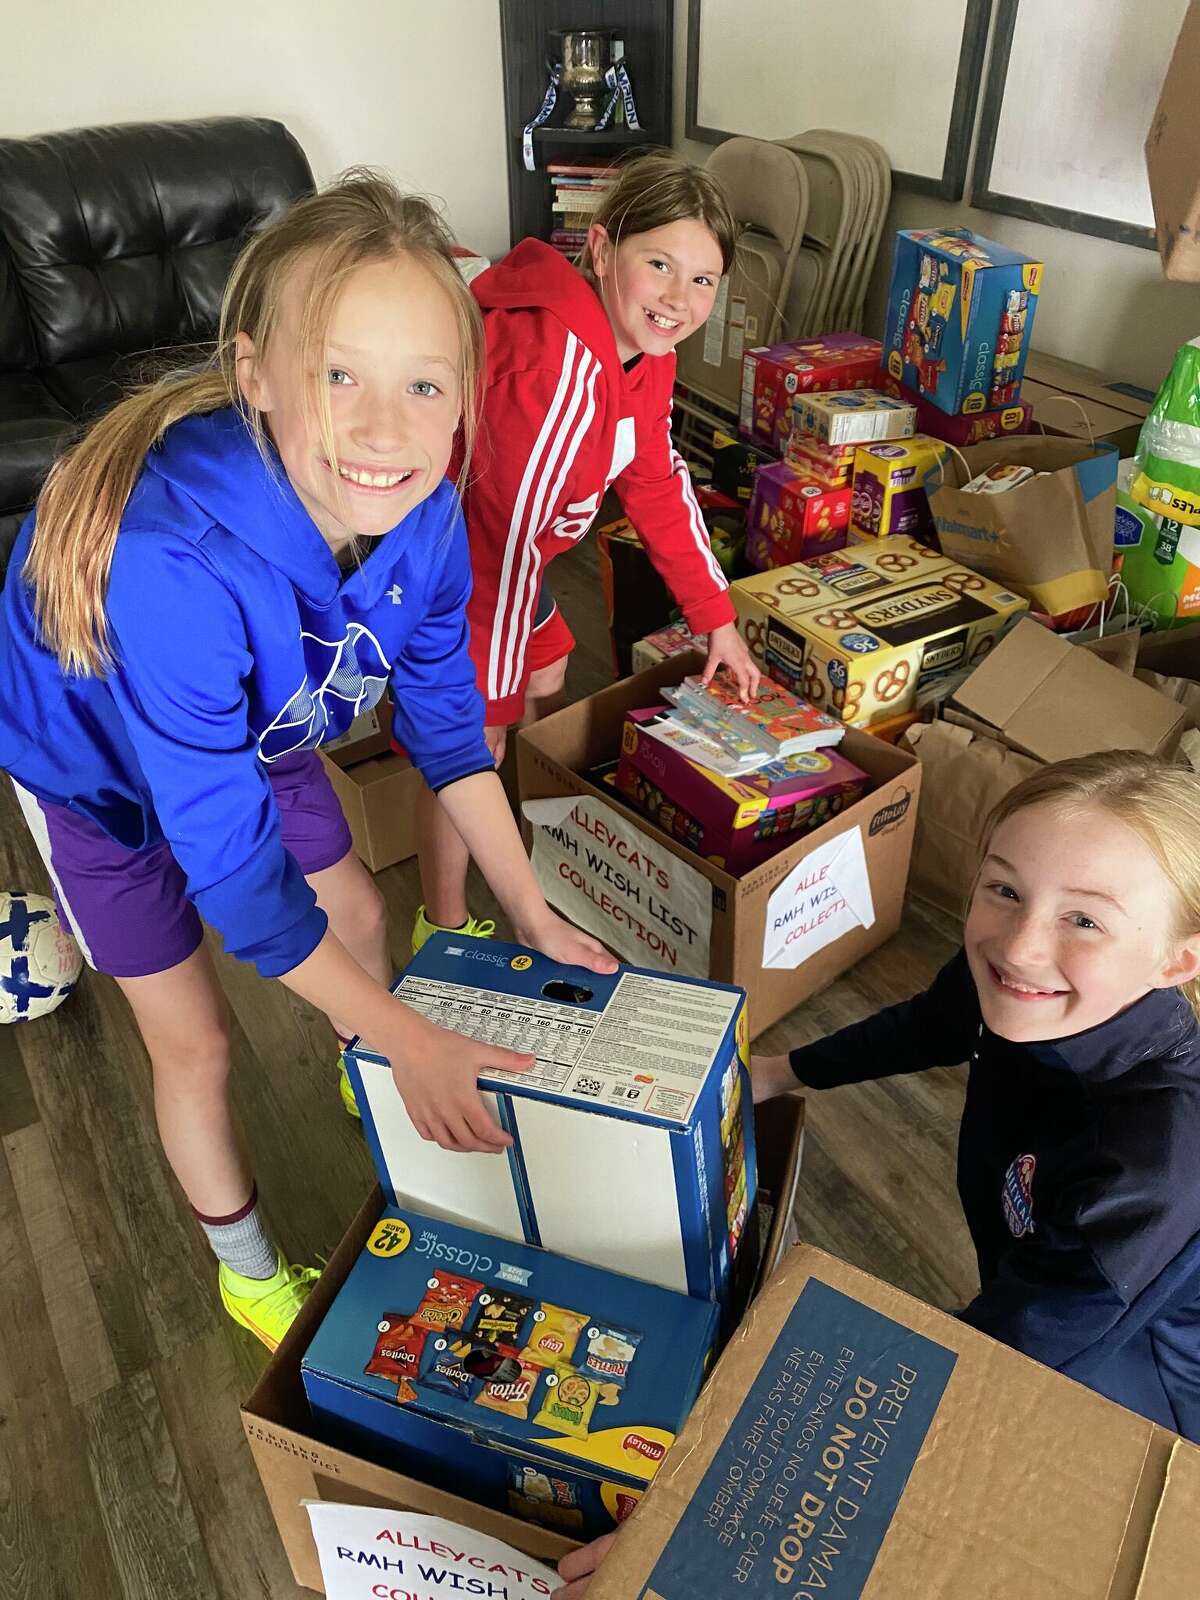 The Albany Alleycats organization collected goods and supplies for the Ronald McDonald House and players and parents dropped off five carloads of supplies to the organization. Above, from left, Maggie Mullin, Kennedy Hovey and Zoey Beesmer participated in the drop-off. The girls were given a tour of the house and learned about the services provided by the organization.